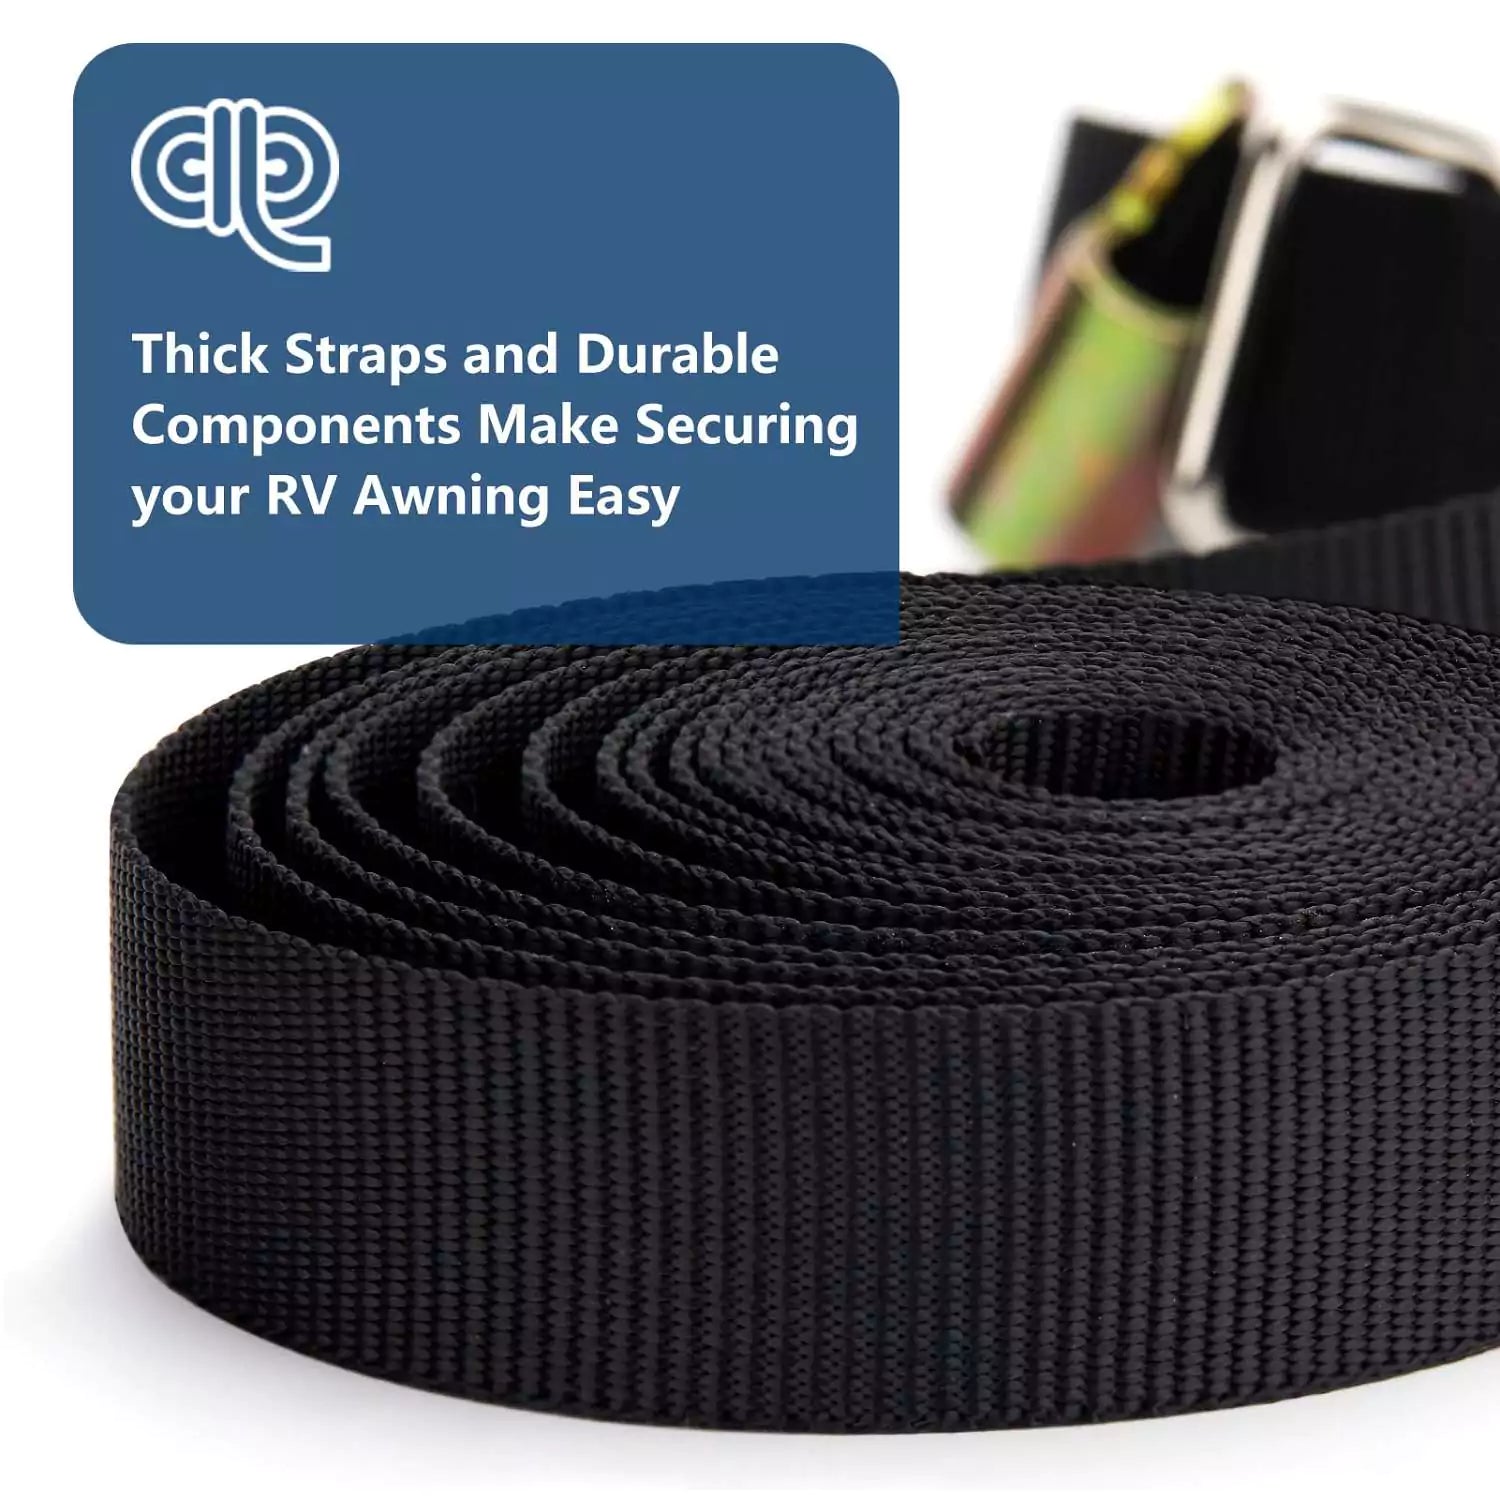 Thick straps and durable components for awning tie downs